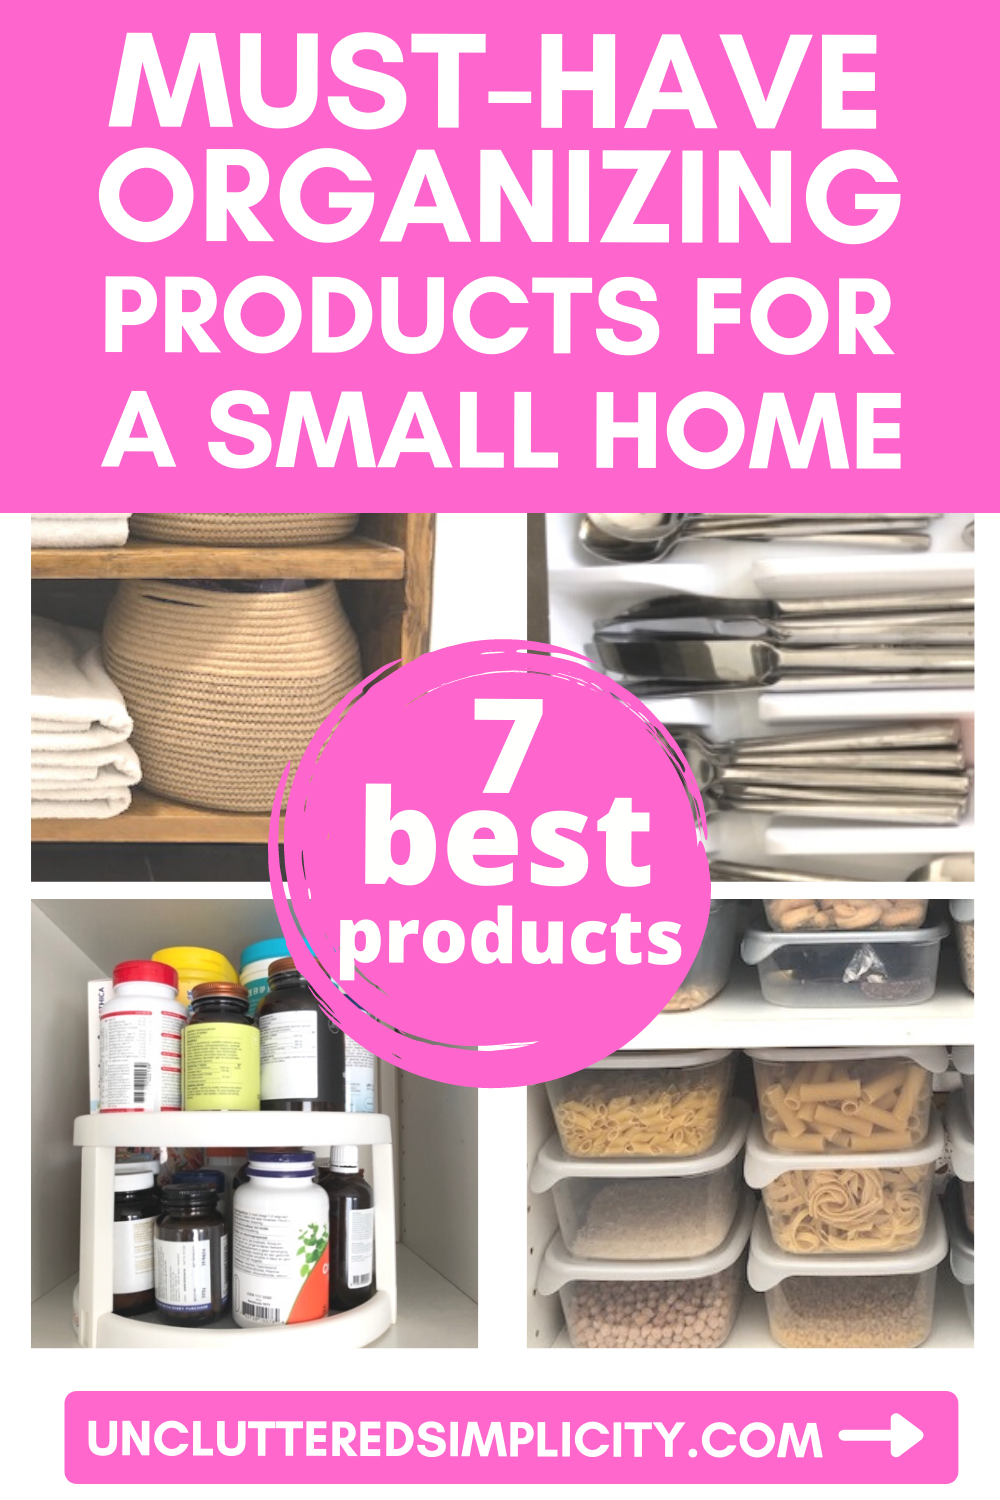 Pin organizing products for a small home 2